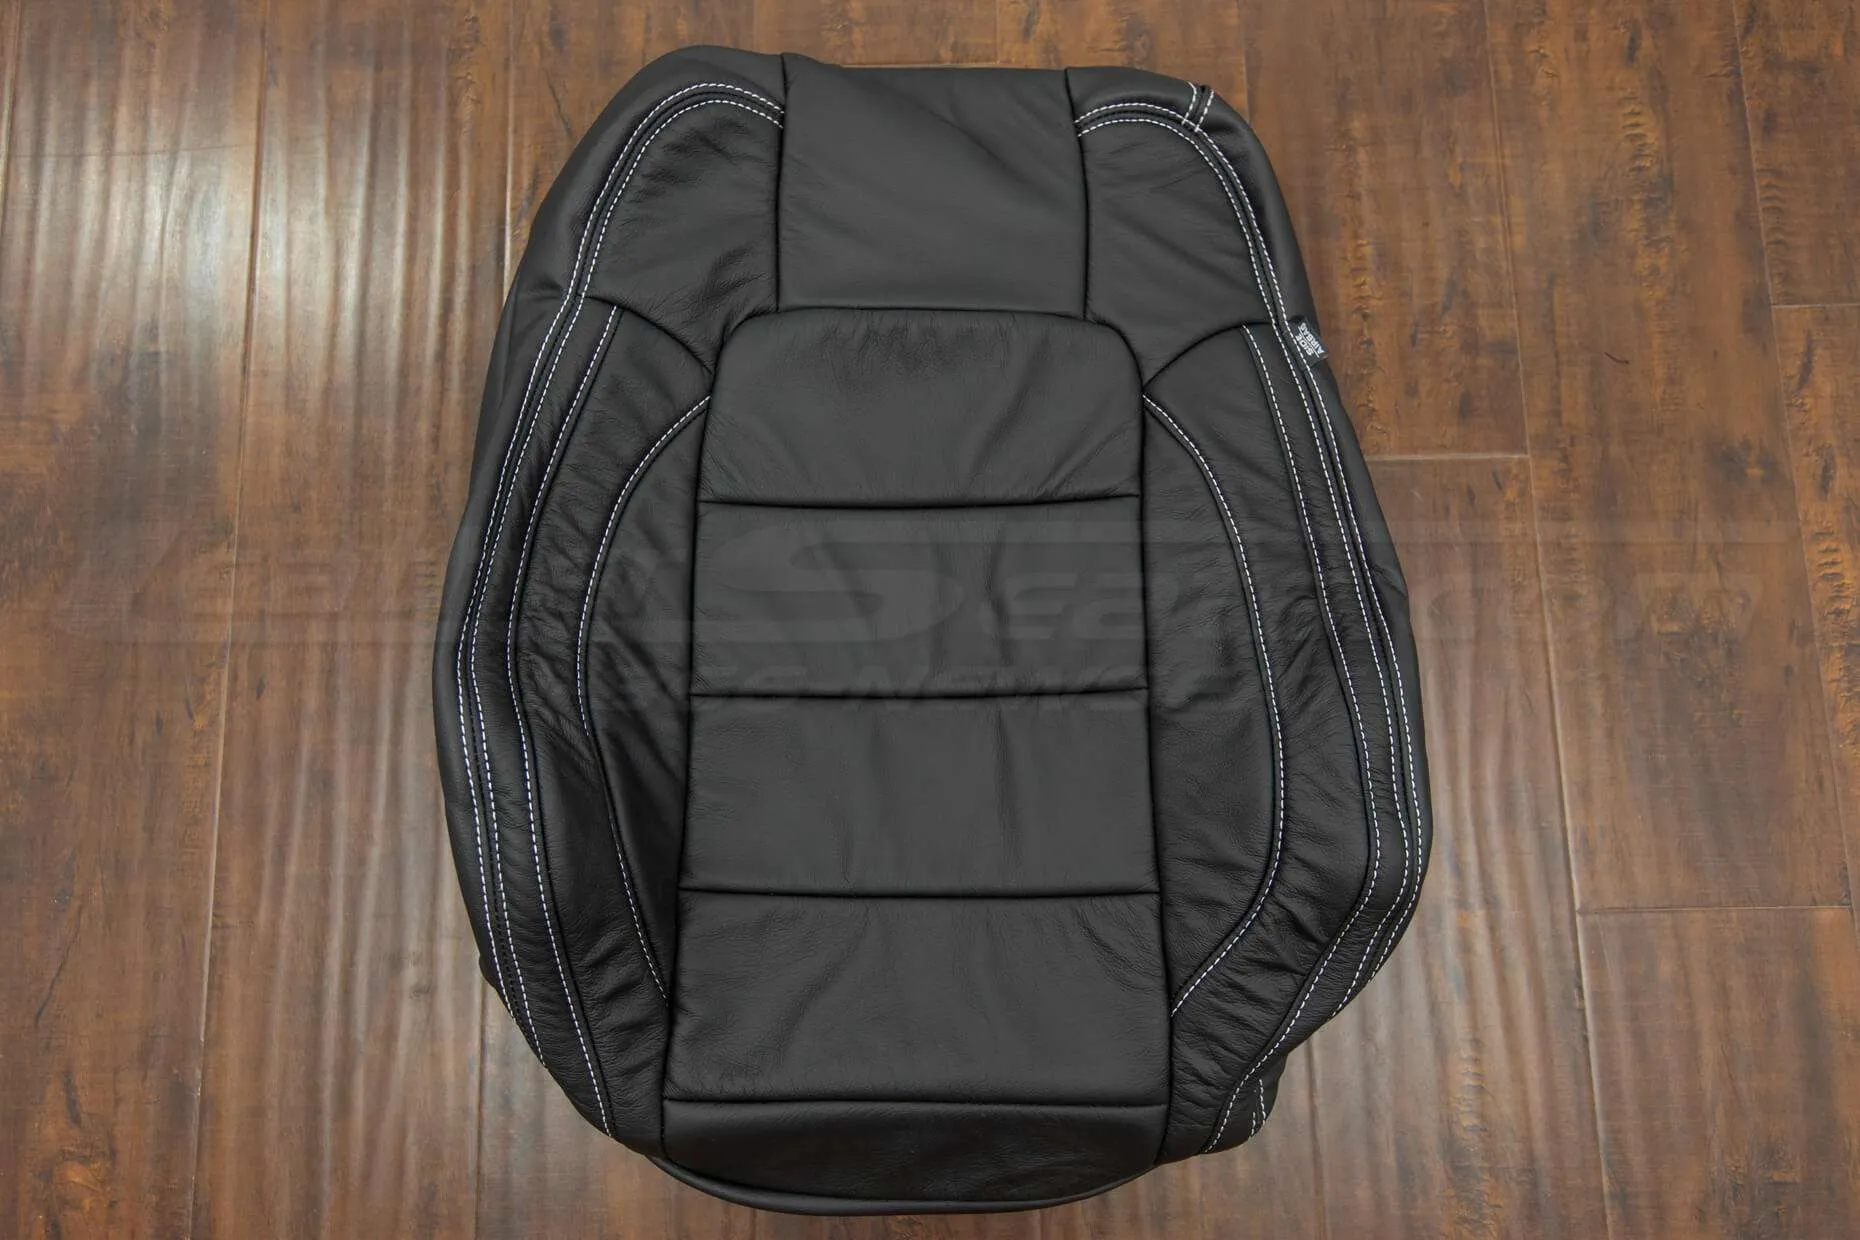 Ford Mustang Leather Seats - Black - Front backrest